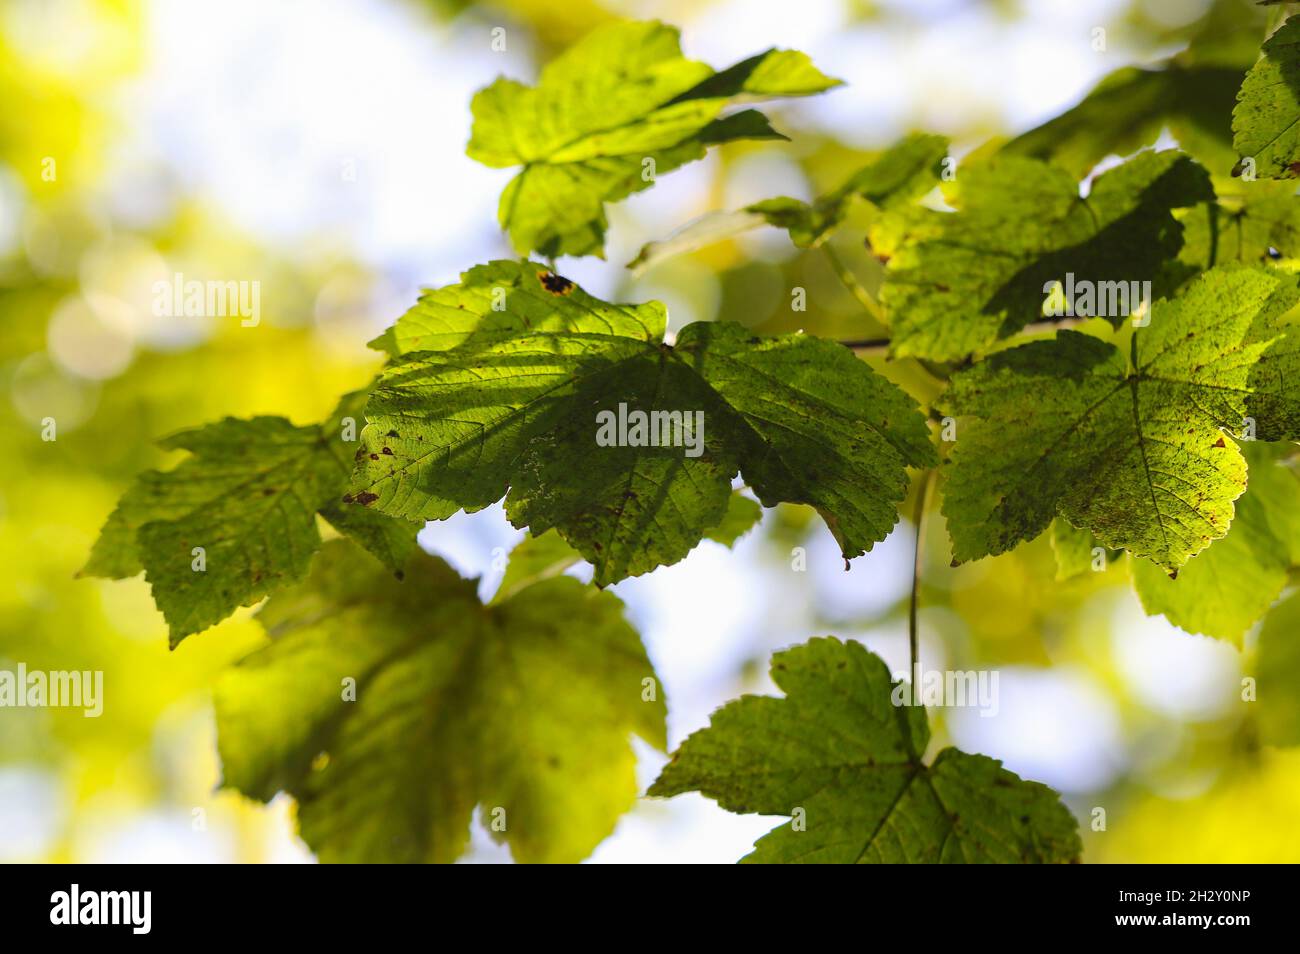 Sycamore leaves 'Acer pseudoplatanus' backlit by sunlight with soft bokeh background. Leaves of tree turning yellow during Autumn Fall season. Ireland Stock Photo